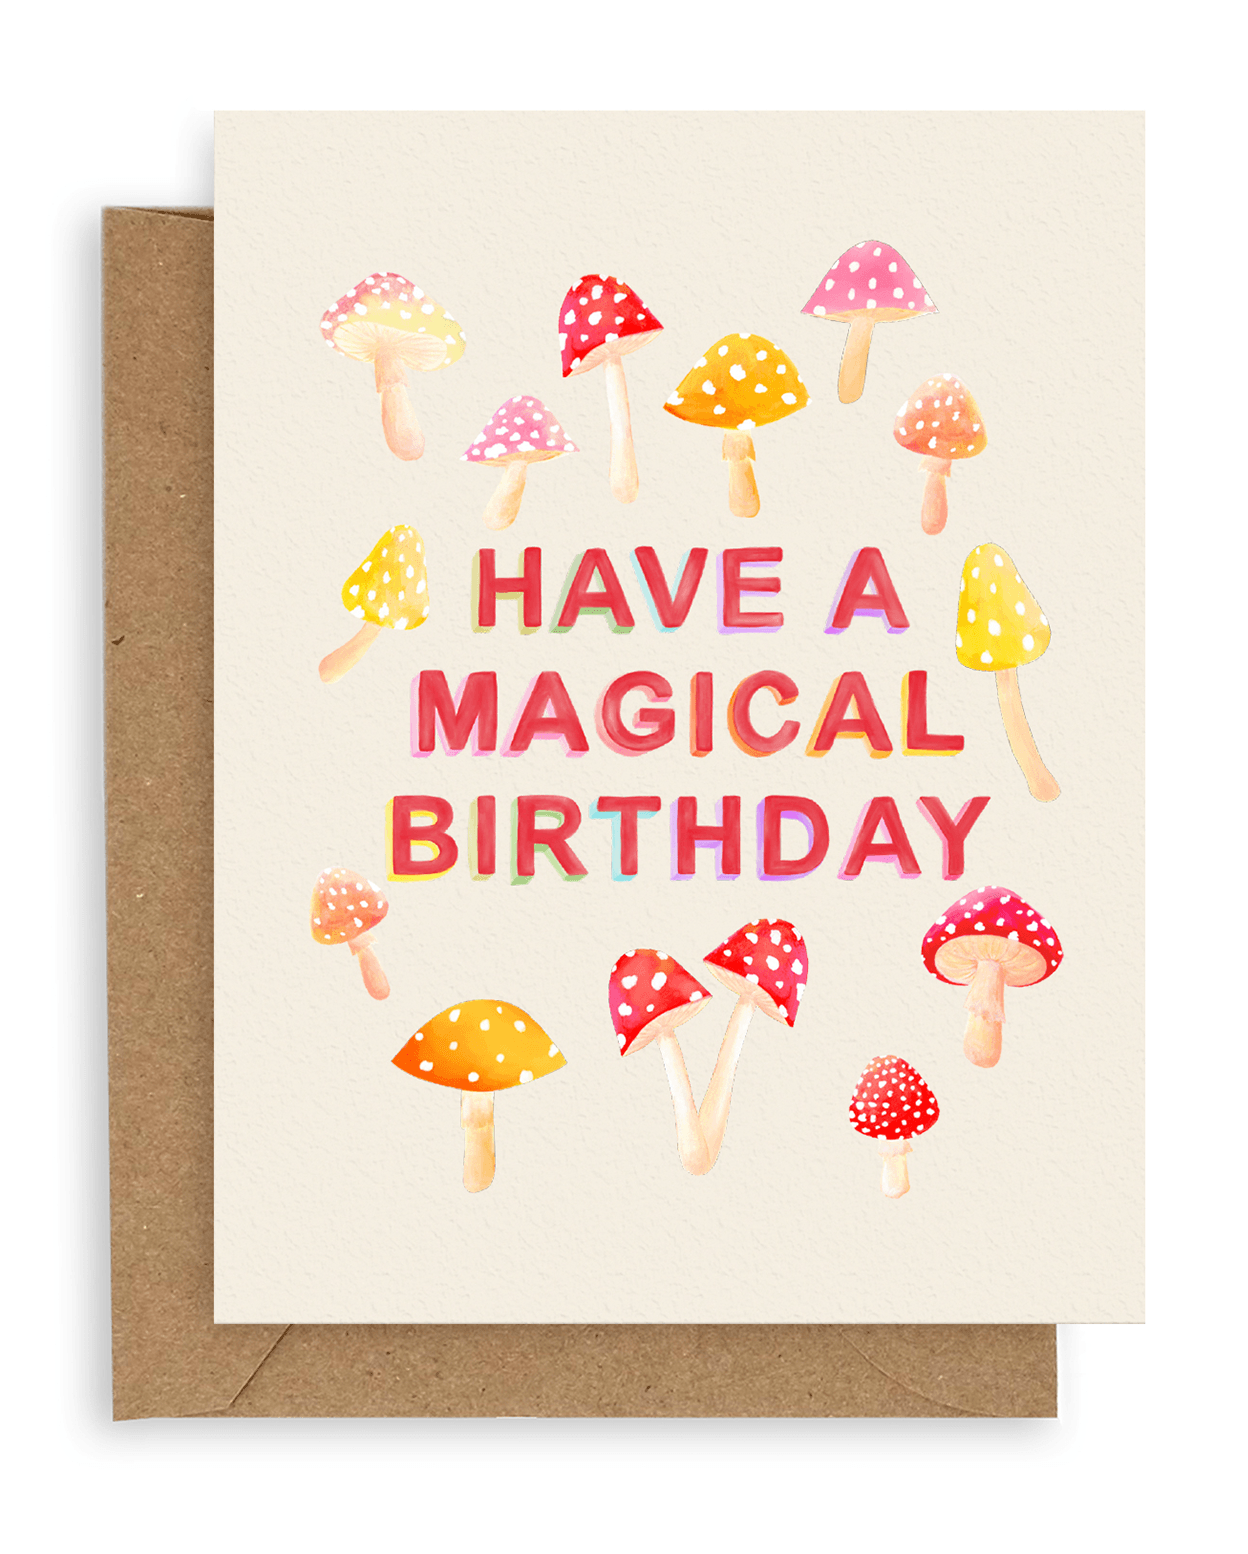 Cream colored card with pink, orange and red mushrooms mushrooms and red printed text with the words &quot;Have A Magical Birthday&quot; in the middle. Shown with kraft envelope.